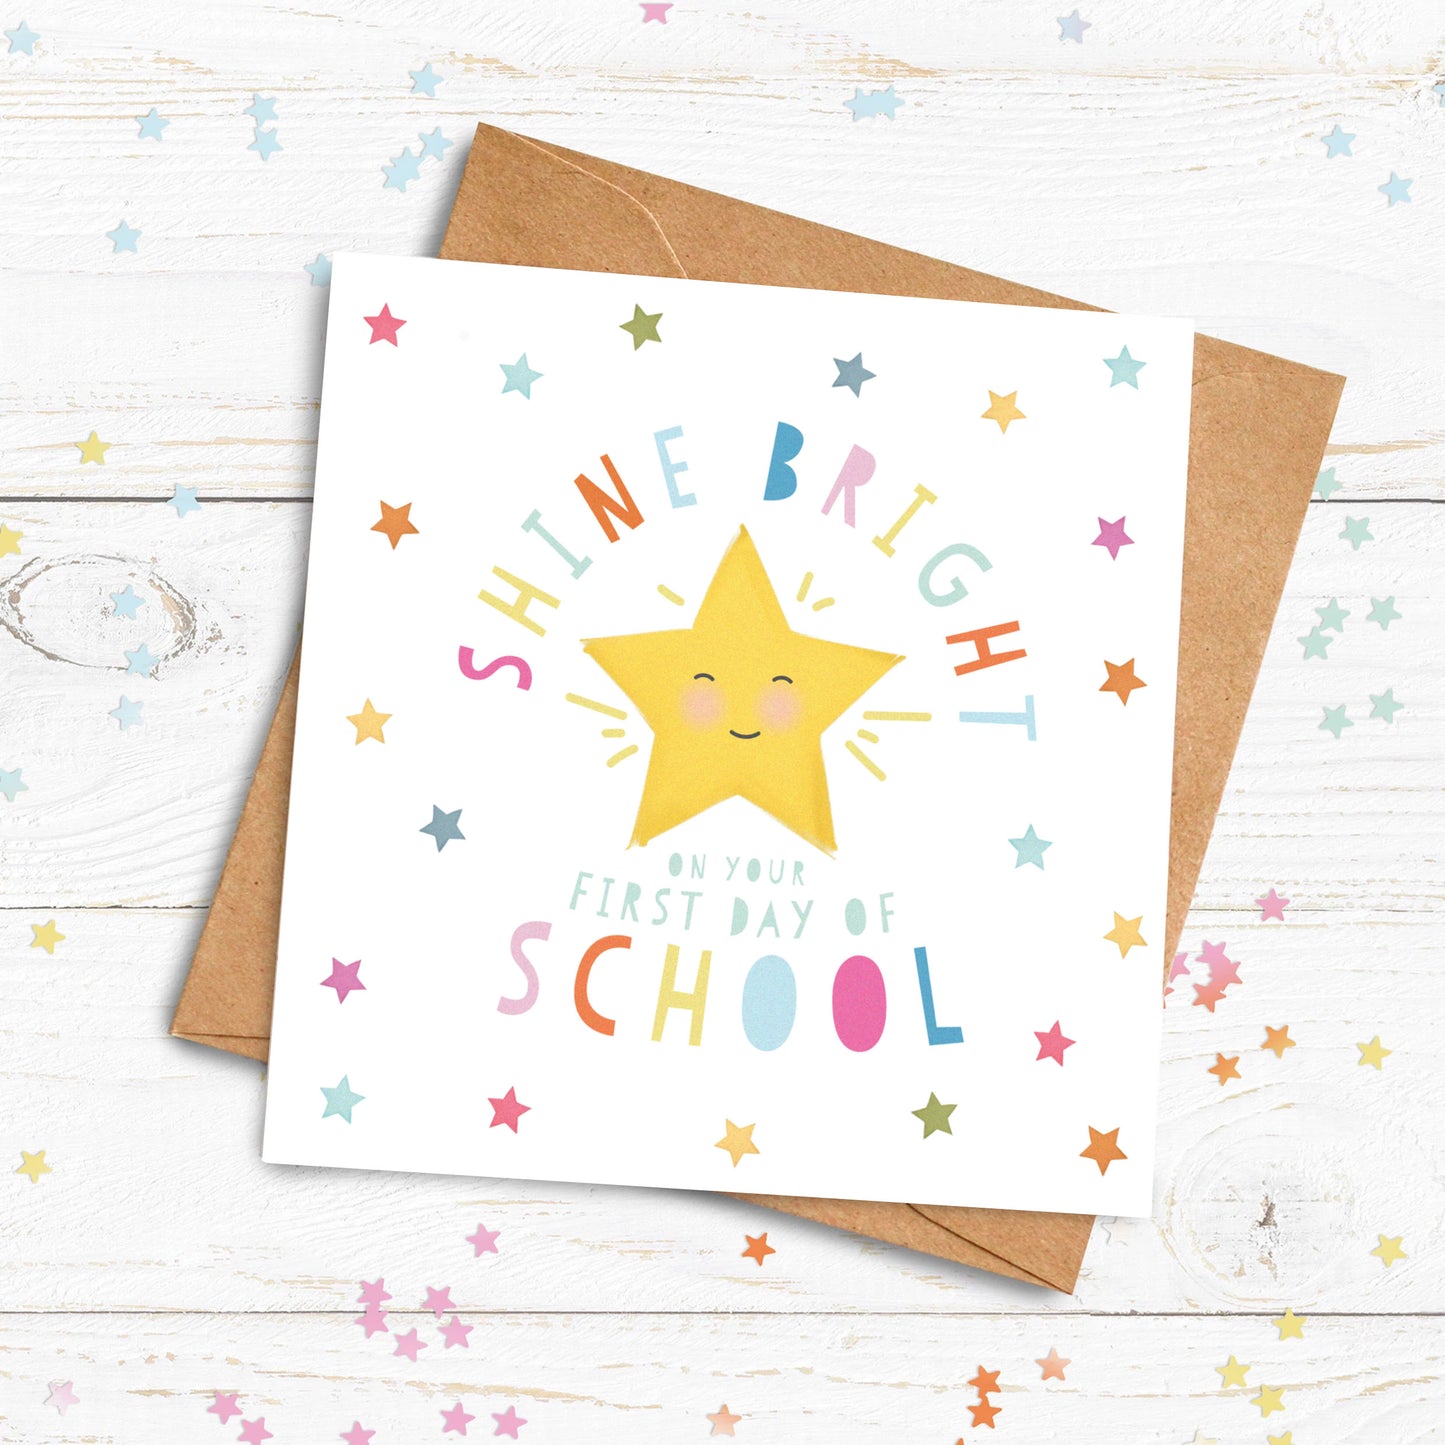 Shine Bright on your First Day Card. First day of school card. Good Luck Card. Nursery Card. Send Direct Option